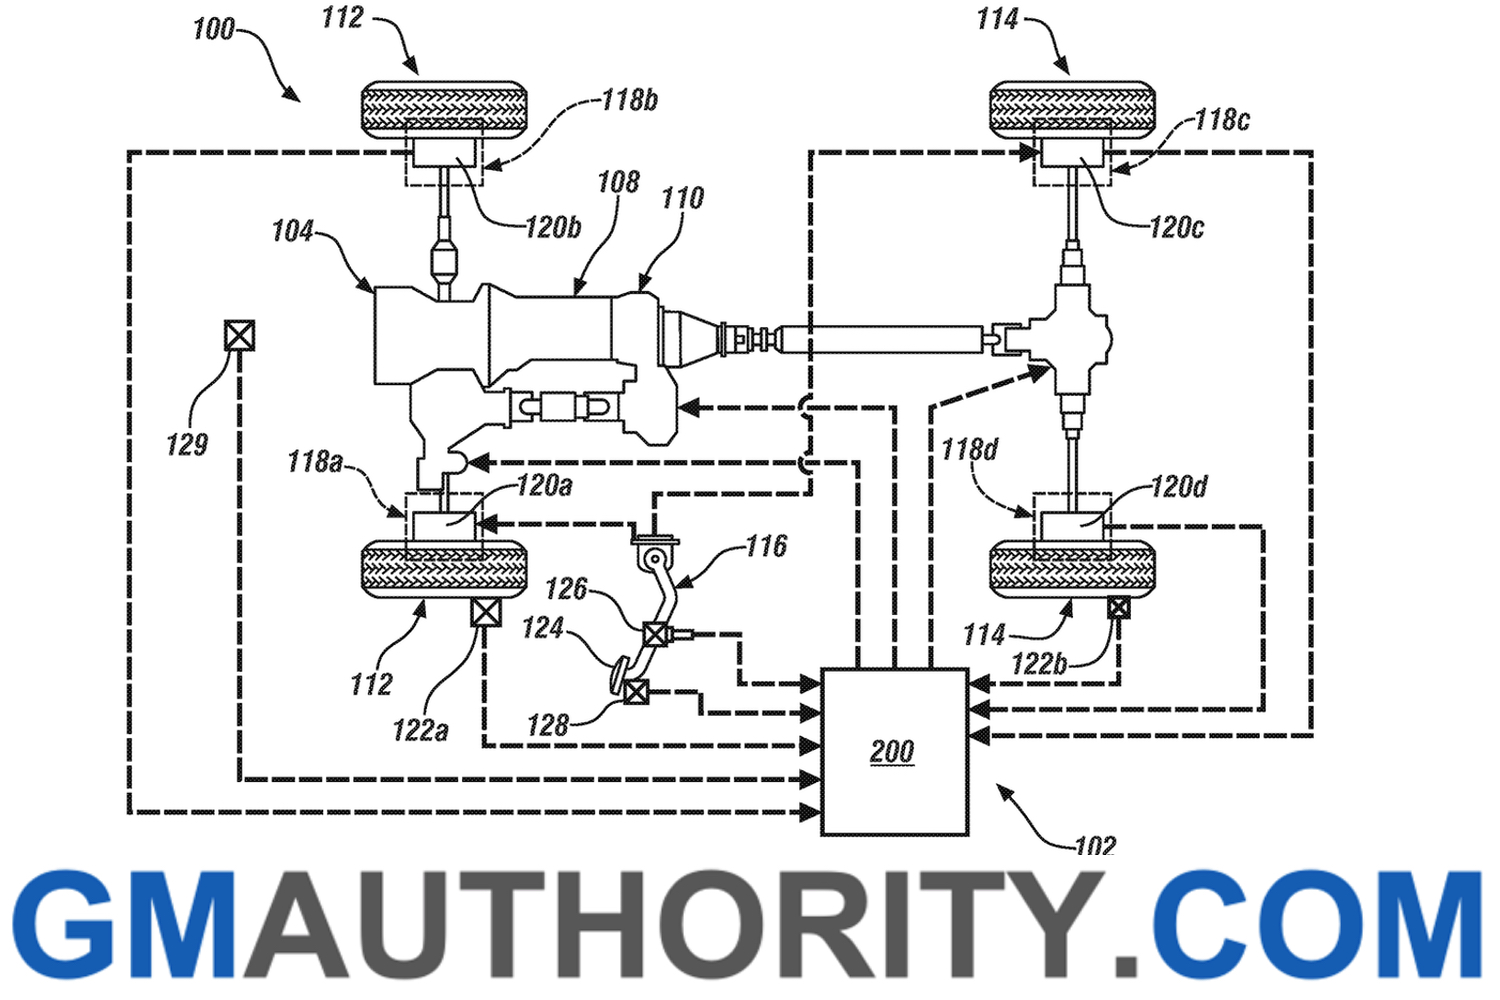 GM Patents Electronic Brake-By-Wire System | GM Authority Cobalt Nickel Phase Diagram GM Authority